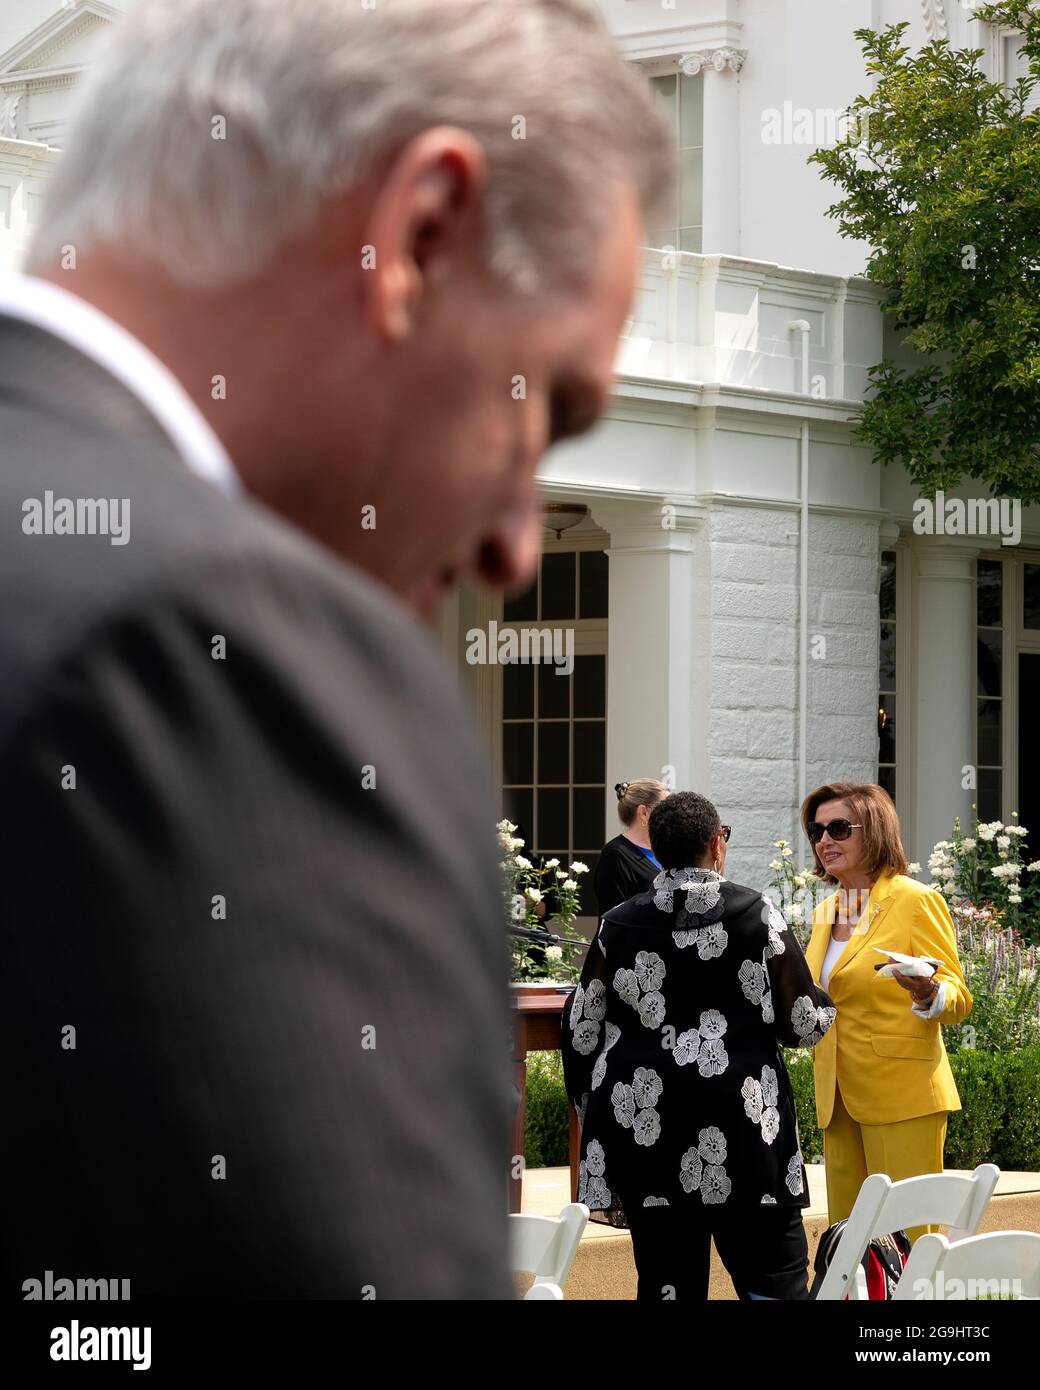 Speaker of the House Nancy Pelosi, a Democrat from California, right, speaks to Marcia Fudge, U.S. Secretary of Housing and Urban Development (HUD), as House Minority Leader Kevin McCarthy, a Republican from California, left, speaks to members of the media in the Rose Garden of the White House in Washington, DC, U.S., on Monday, July 26, 2021. The Biden administration is keeping foreign travel restrictions in place amid concern about rising Covid-19 case levels as the delta variant spreads. Photographer: Stefani Reynolds/Pool/Sipa USA Stock Photo